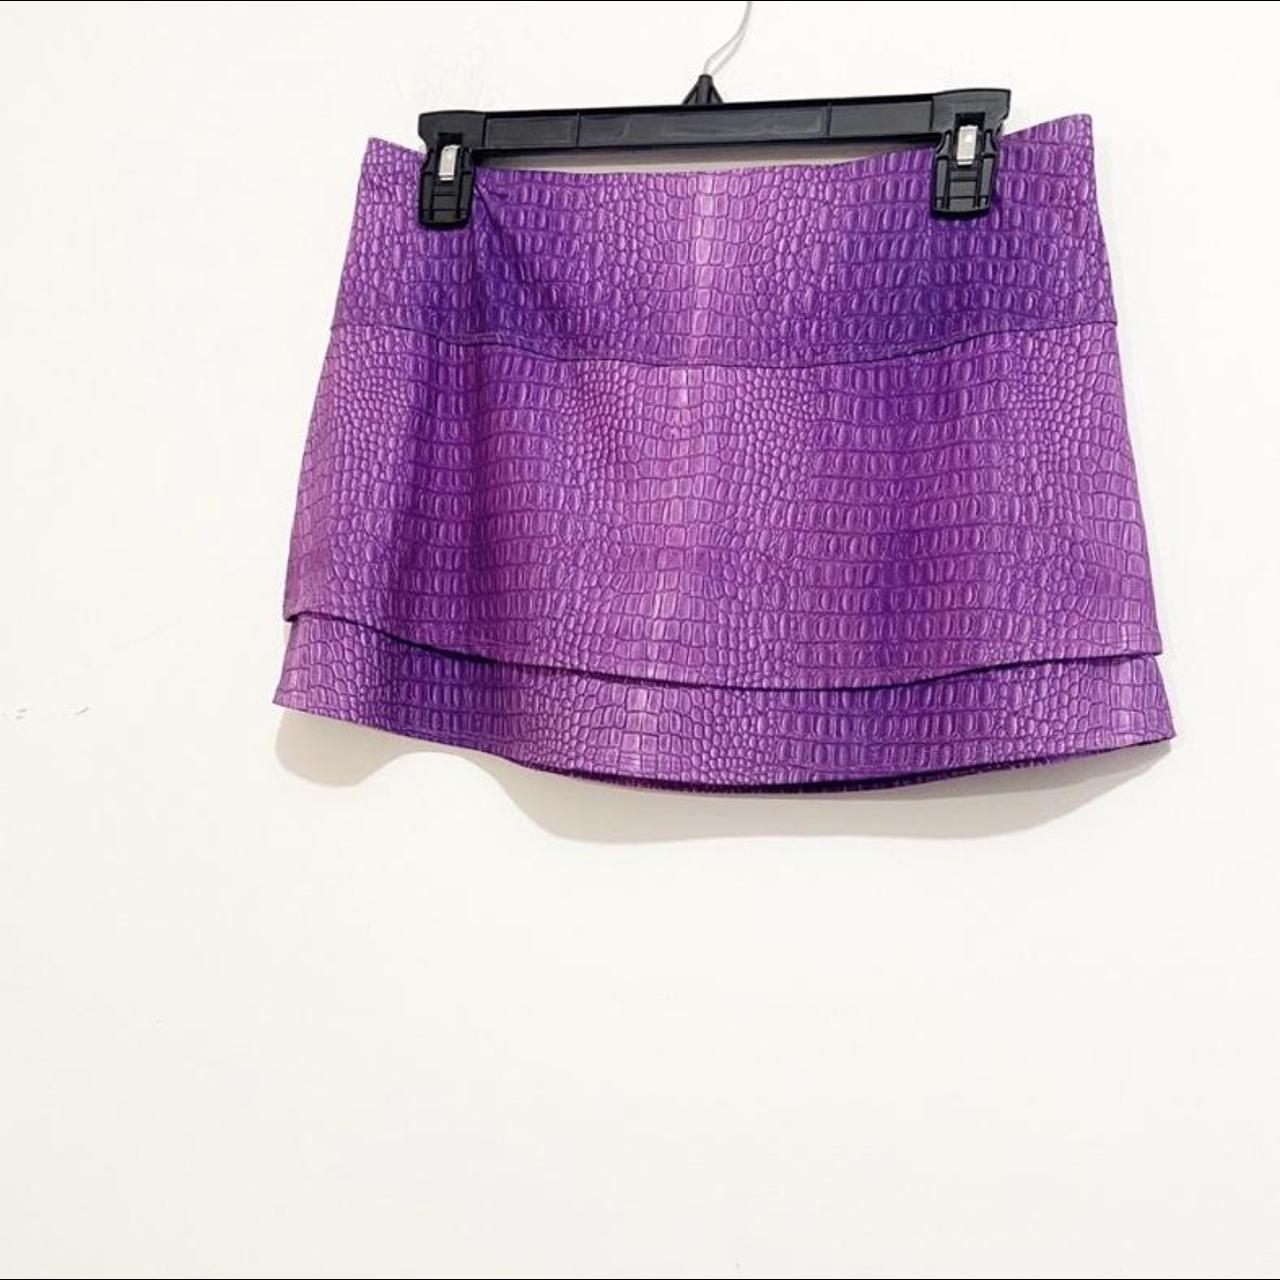 Product Image 1 - Lucy Love Purple Skort. In